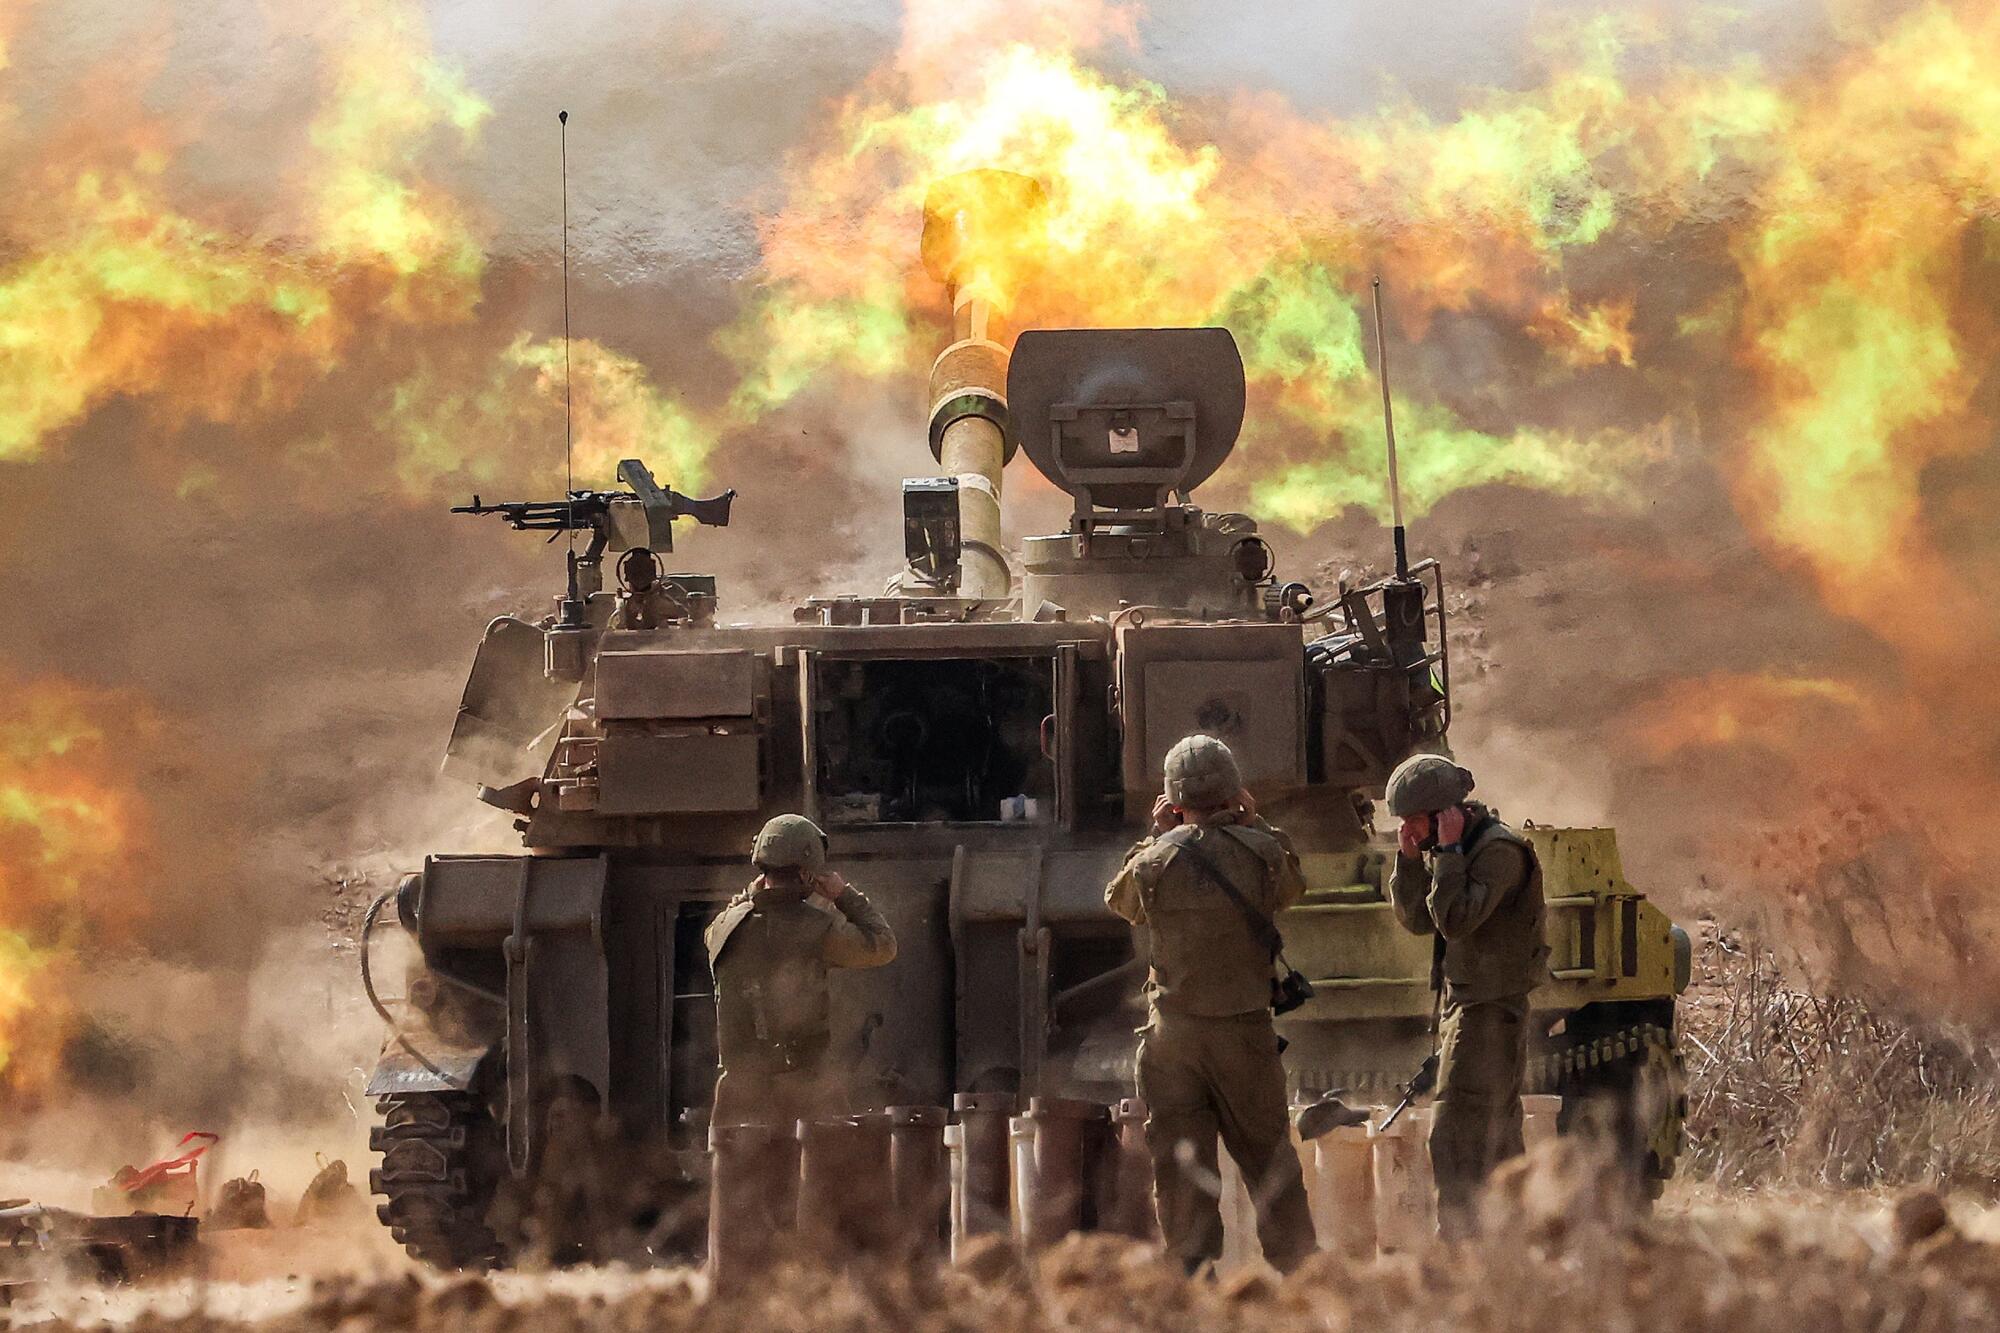 An Israeli army self-propelled howitzer fires rounds.